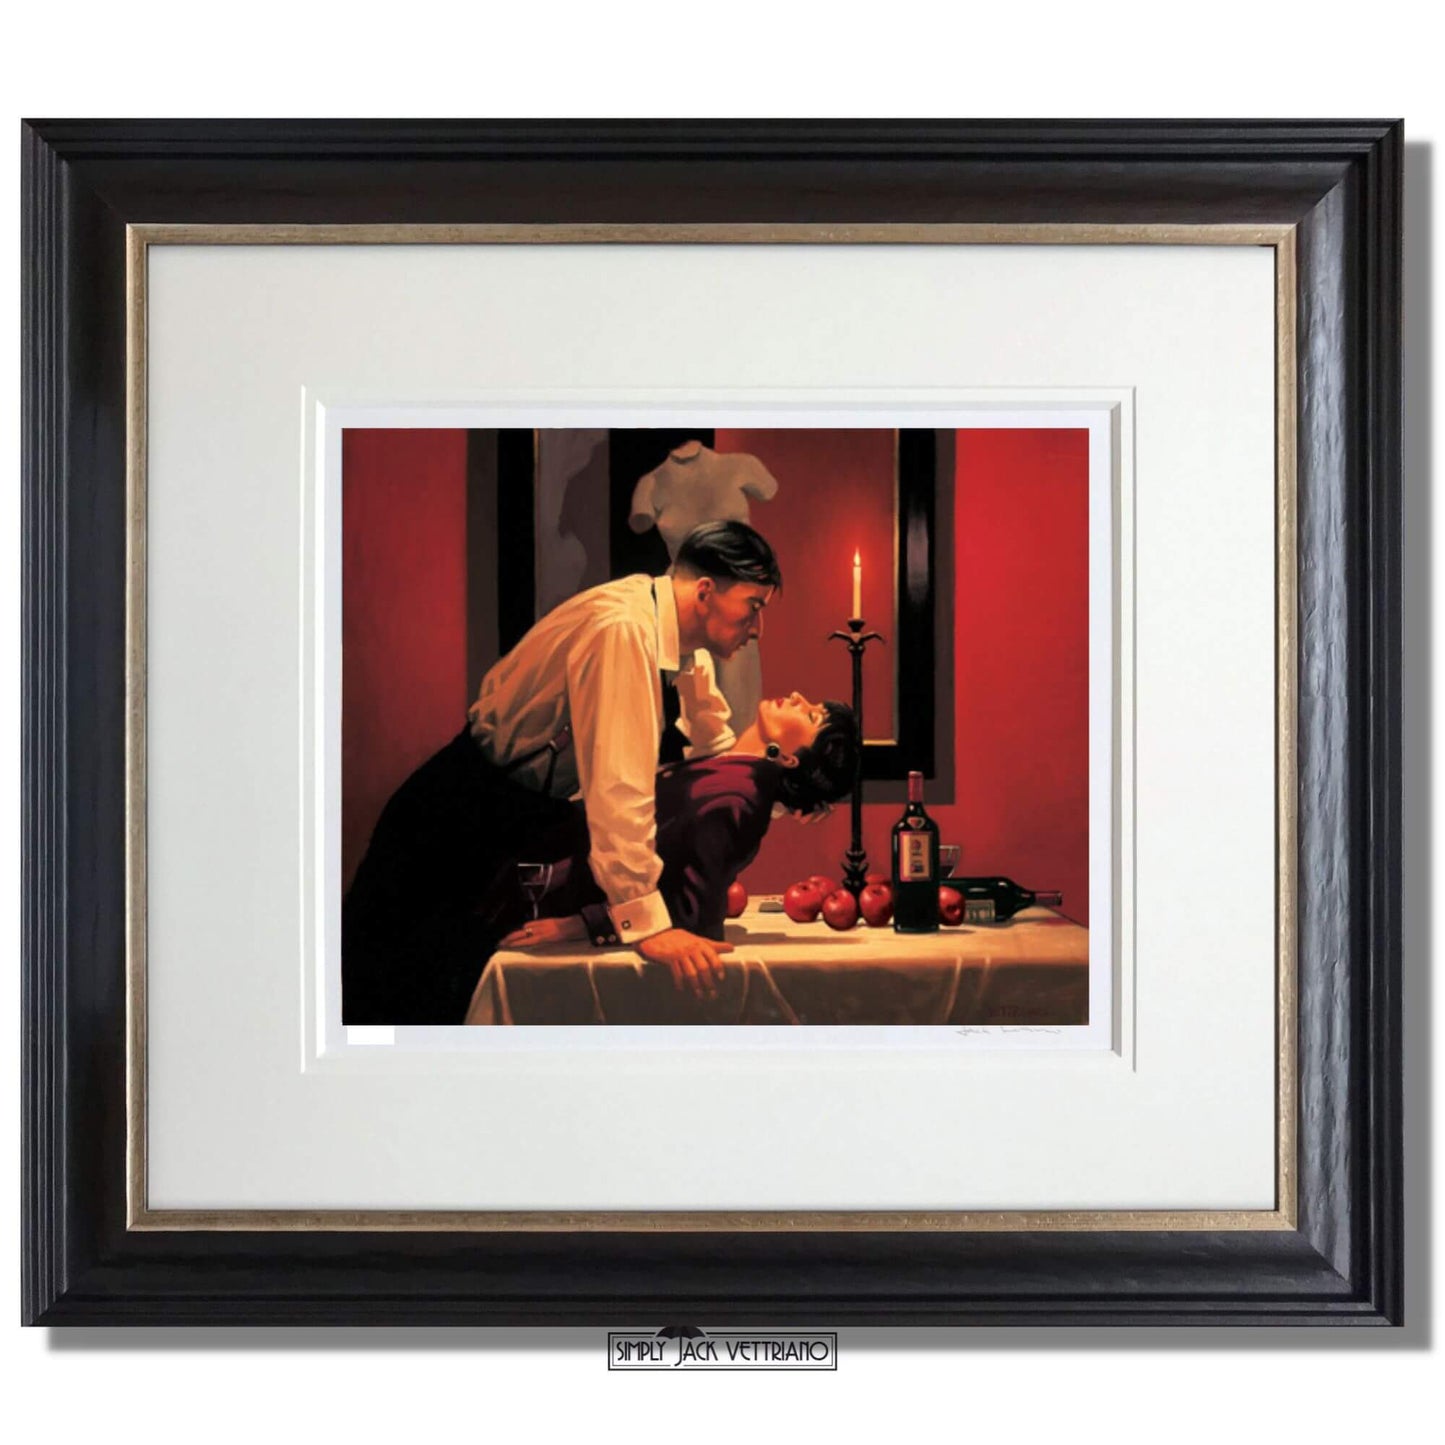 Jack Vettriano The Partys Over by Jack Vettriano Limited Edition Framed